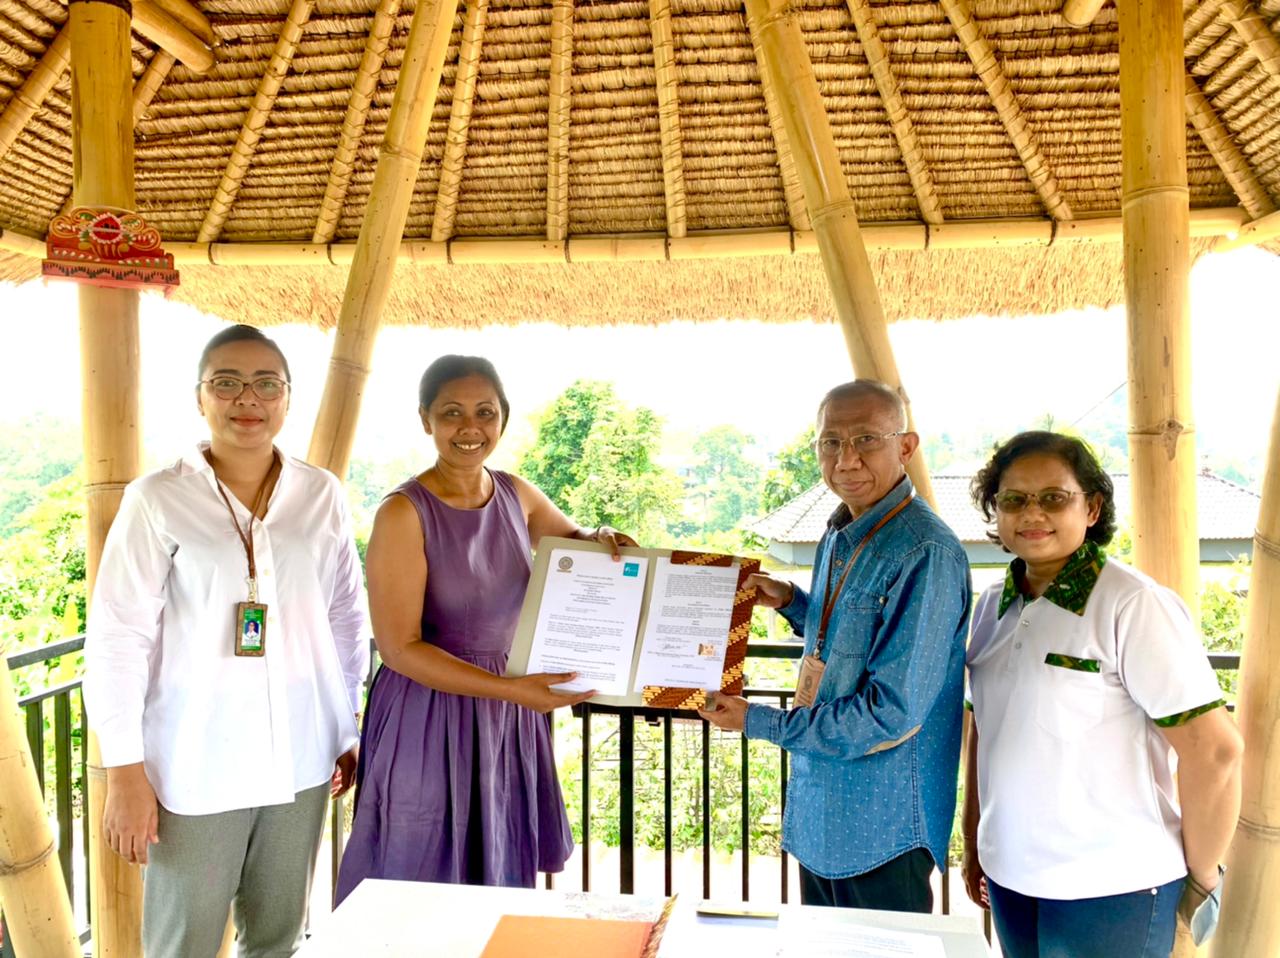 Faculty of Agricultural Technology Udayana University – PT. Karsa Abadi Signs Cooperation Agreement